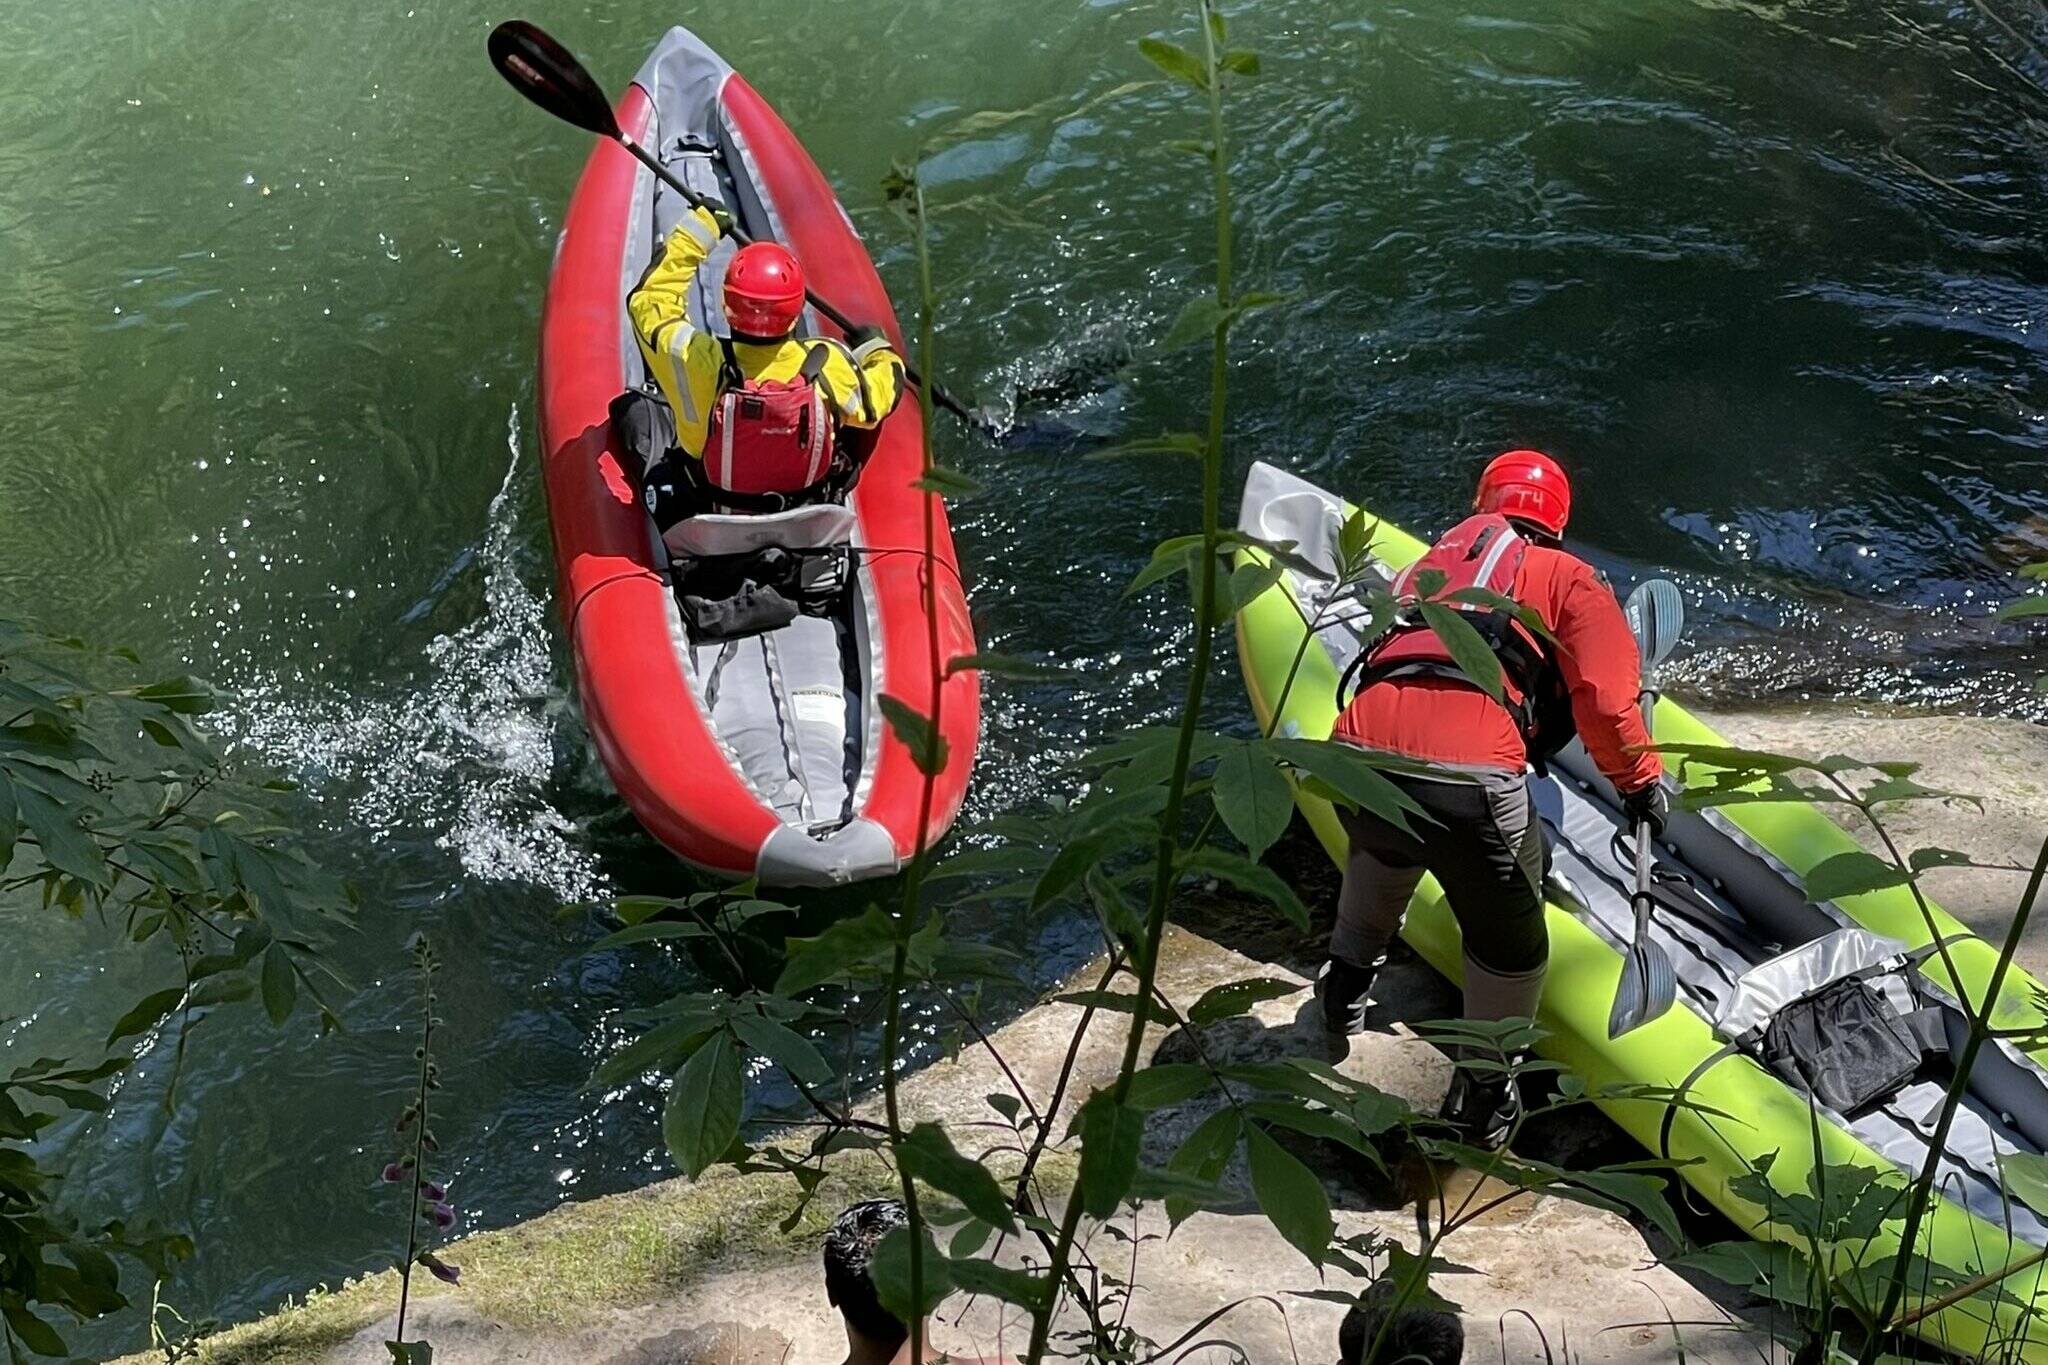 Firefighters from Valley Regional Fire Authority use kayaks to search the Green River on Saturday afternoon for a missing swimmer. The search was unfortunately unsuccessful. Photo from Puget Sound Fire via Twitter.